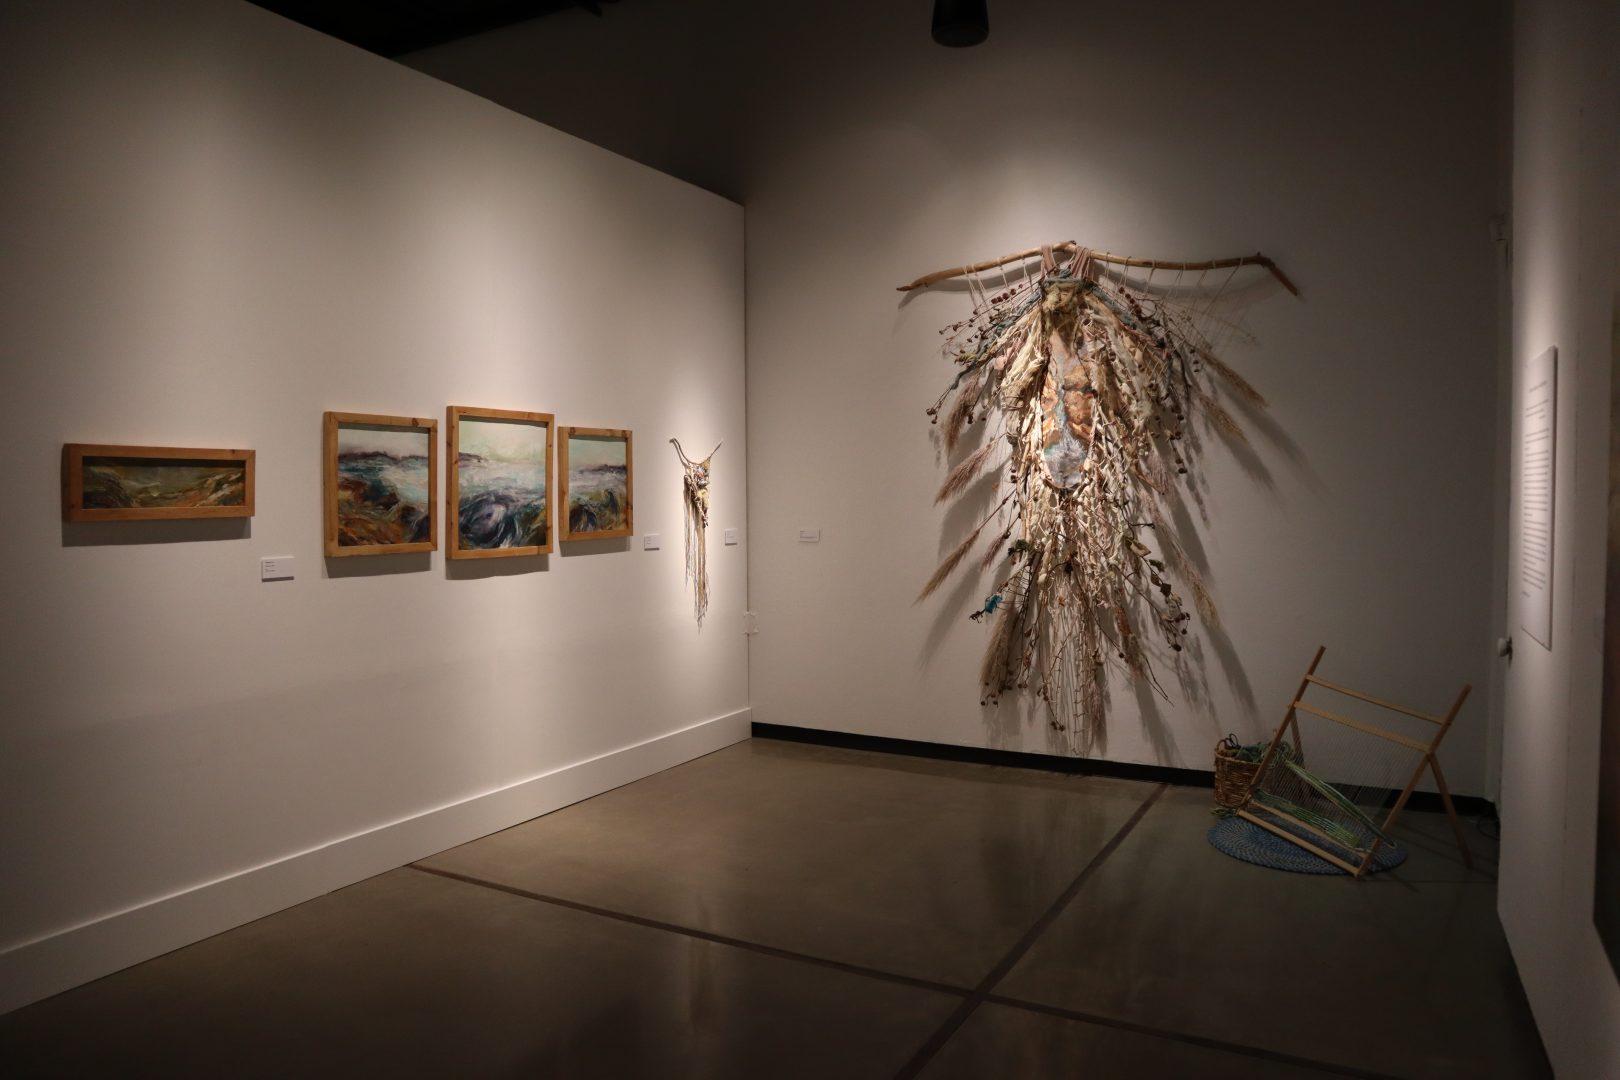 Gabrielle Marie Luos exhibit features acrylic landscapes weaved together with driftwood, seaweed and other plant materials. (Kameron Thorn/The Collegian)